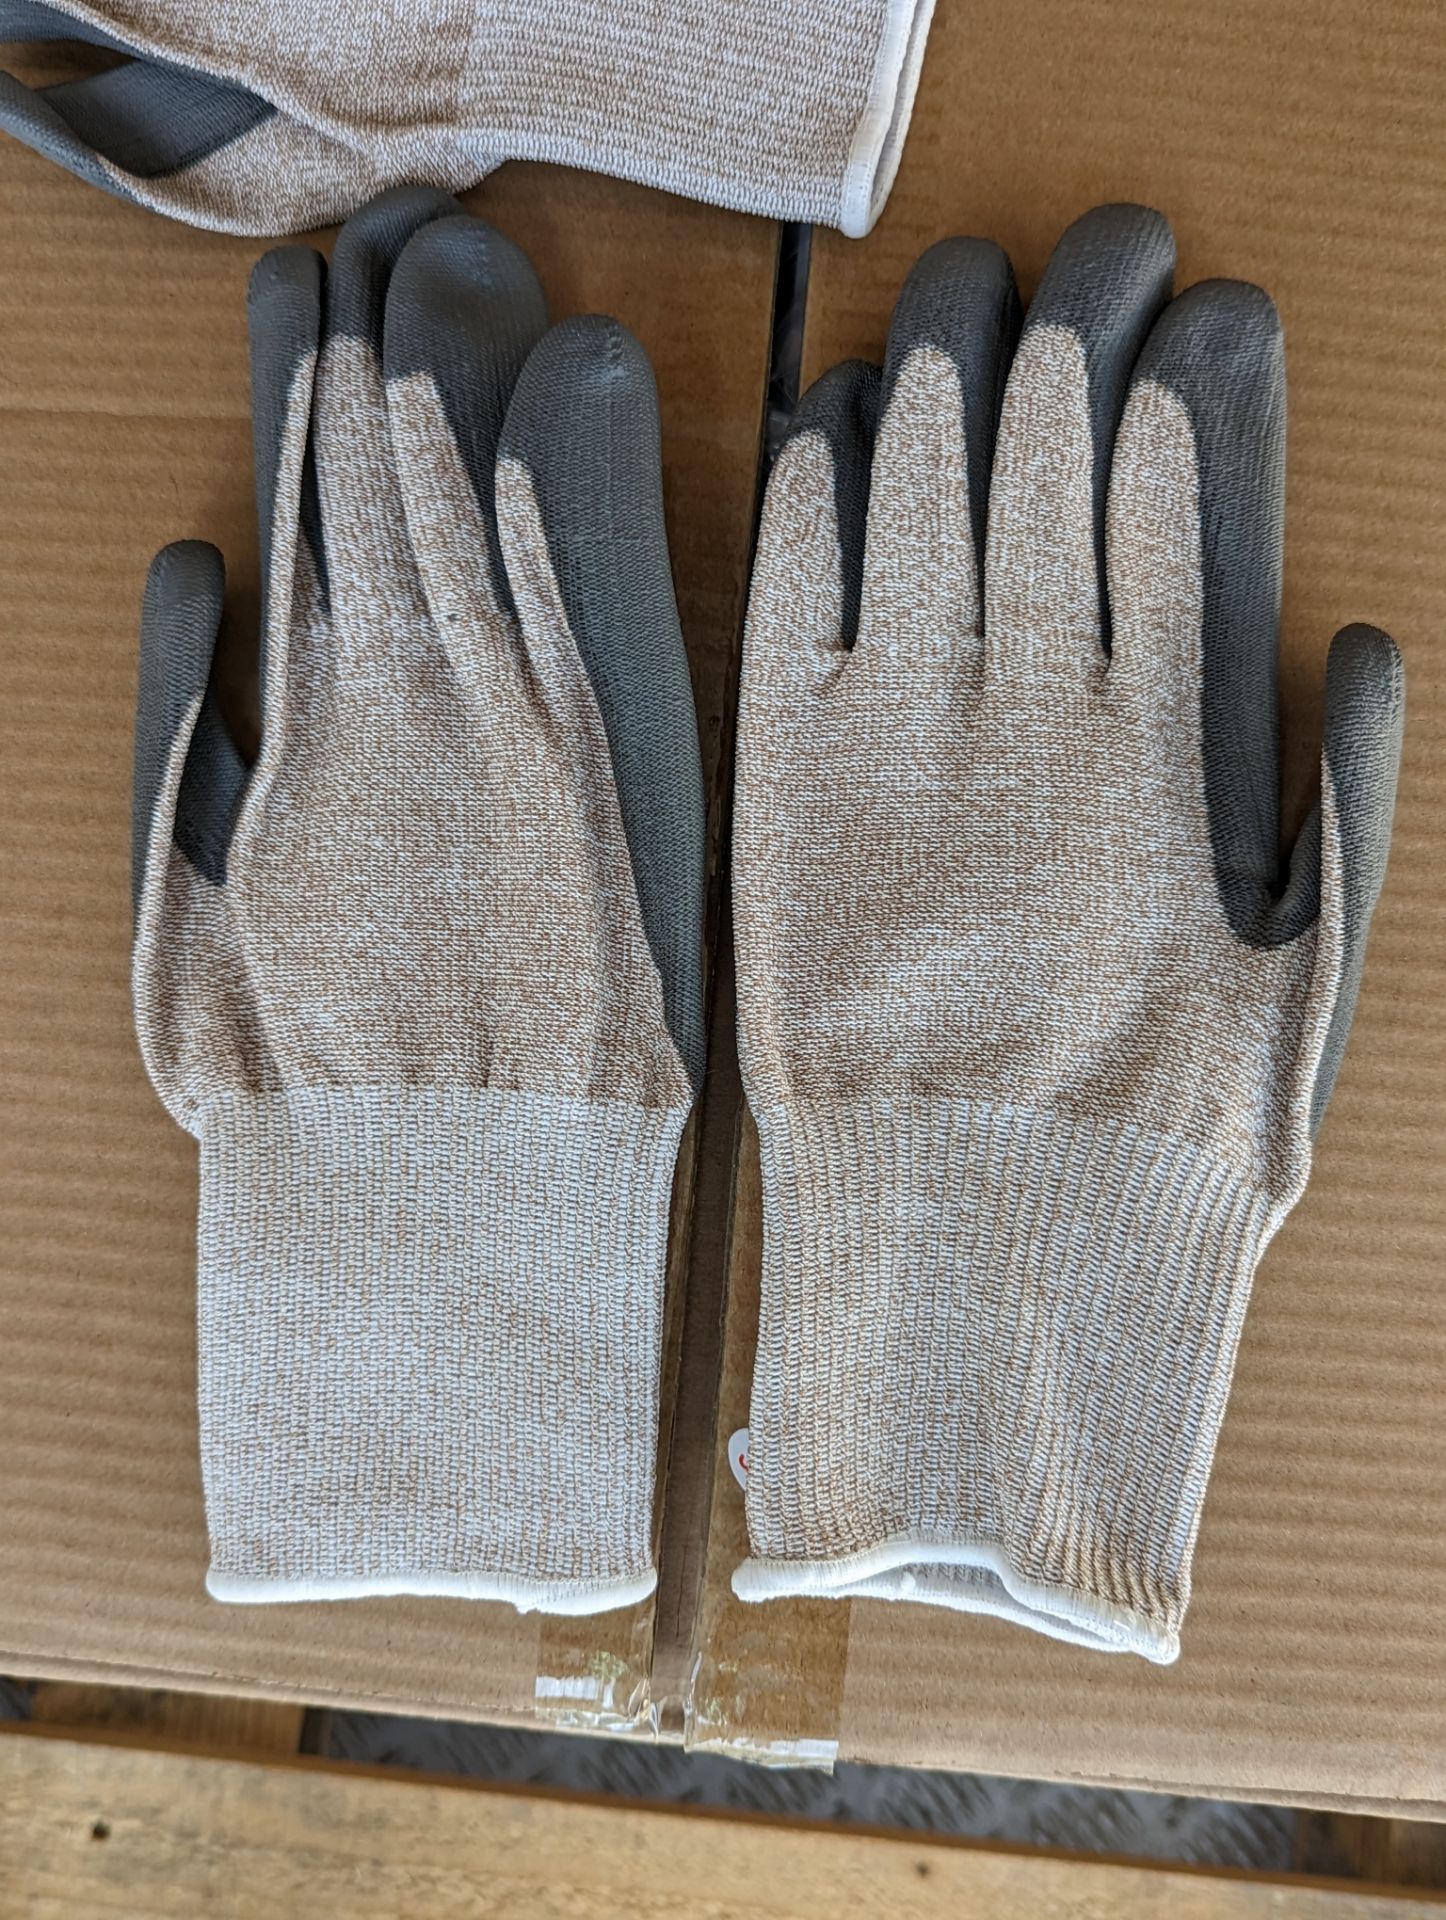 Honeywell cut resistant Gloves 50 pairs - Image 3 of 4